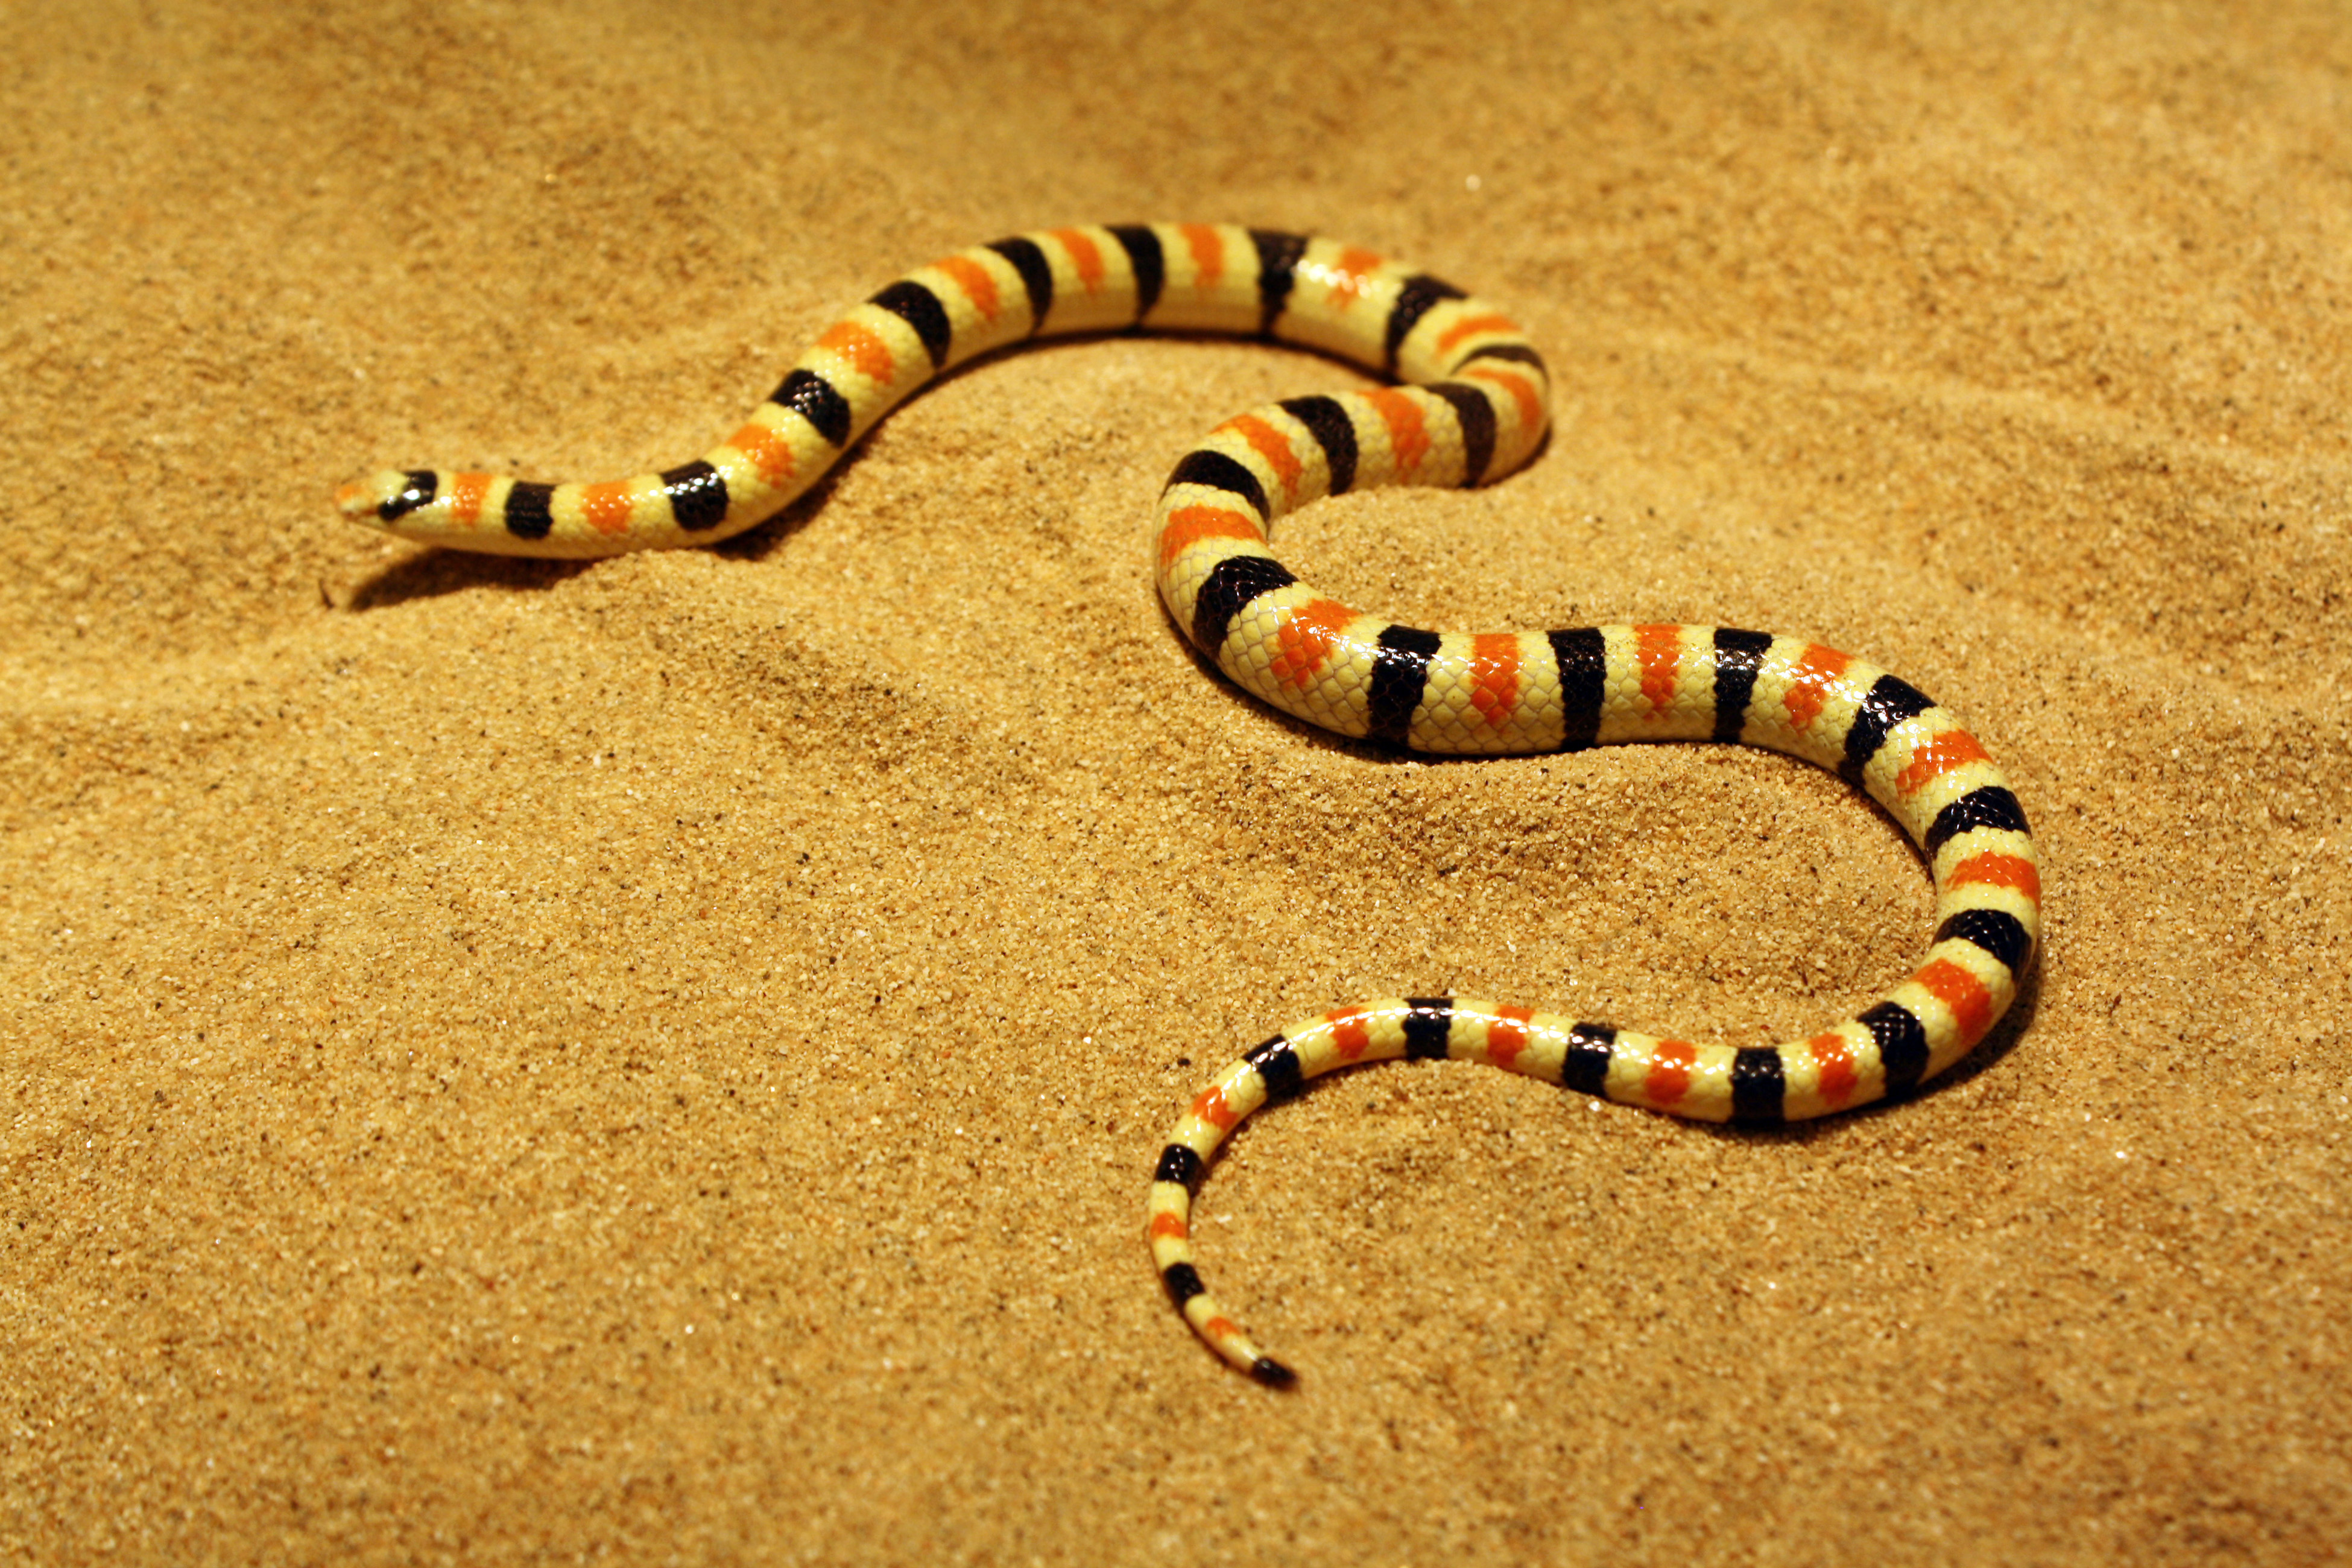 The shovel-nosed snake, which is found in the Mojave Desert of the southeast United States, has an elongated body and low-friction skin, which allow it to swim through sand rapidly and efficiently. It is shown here in a bed of sand in a Georgia Tech laboratory. (Credit: Perrin Schieber)